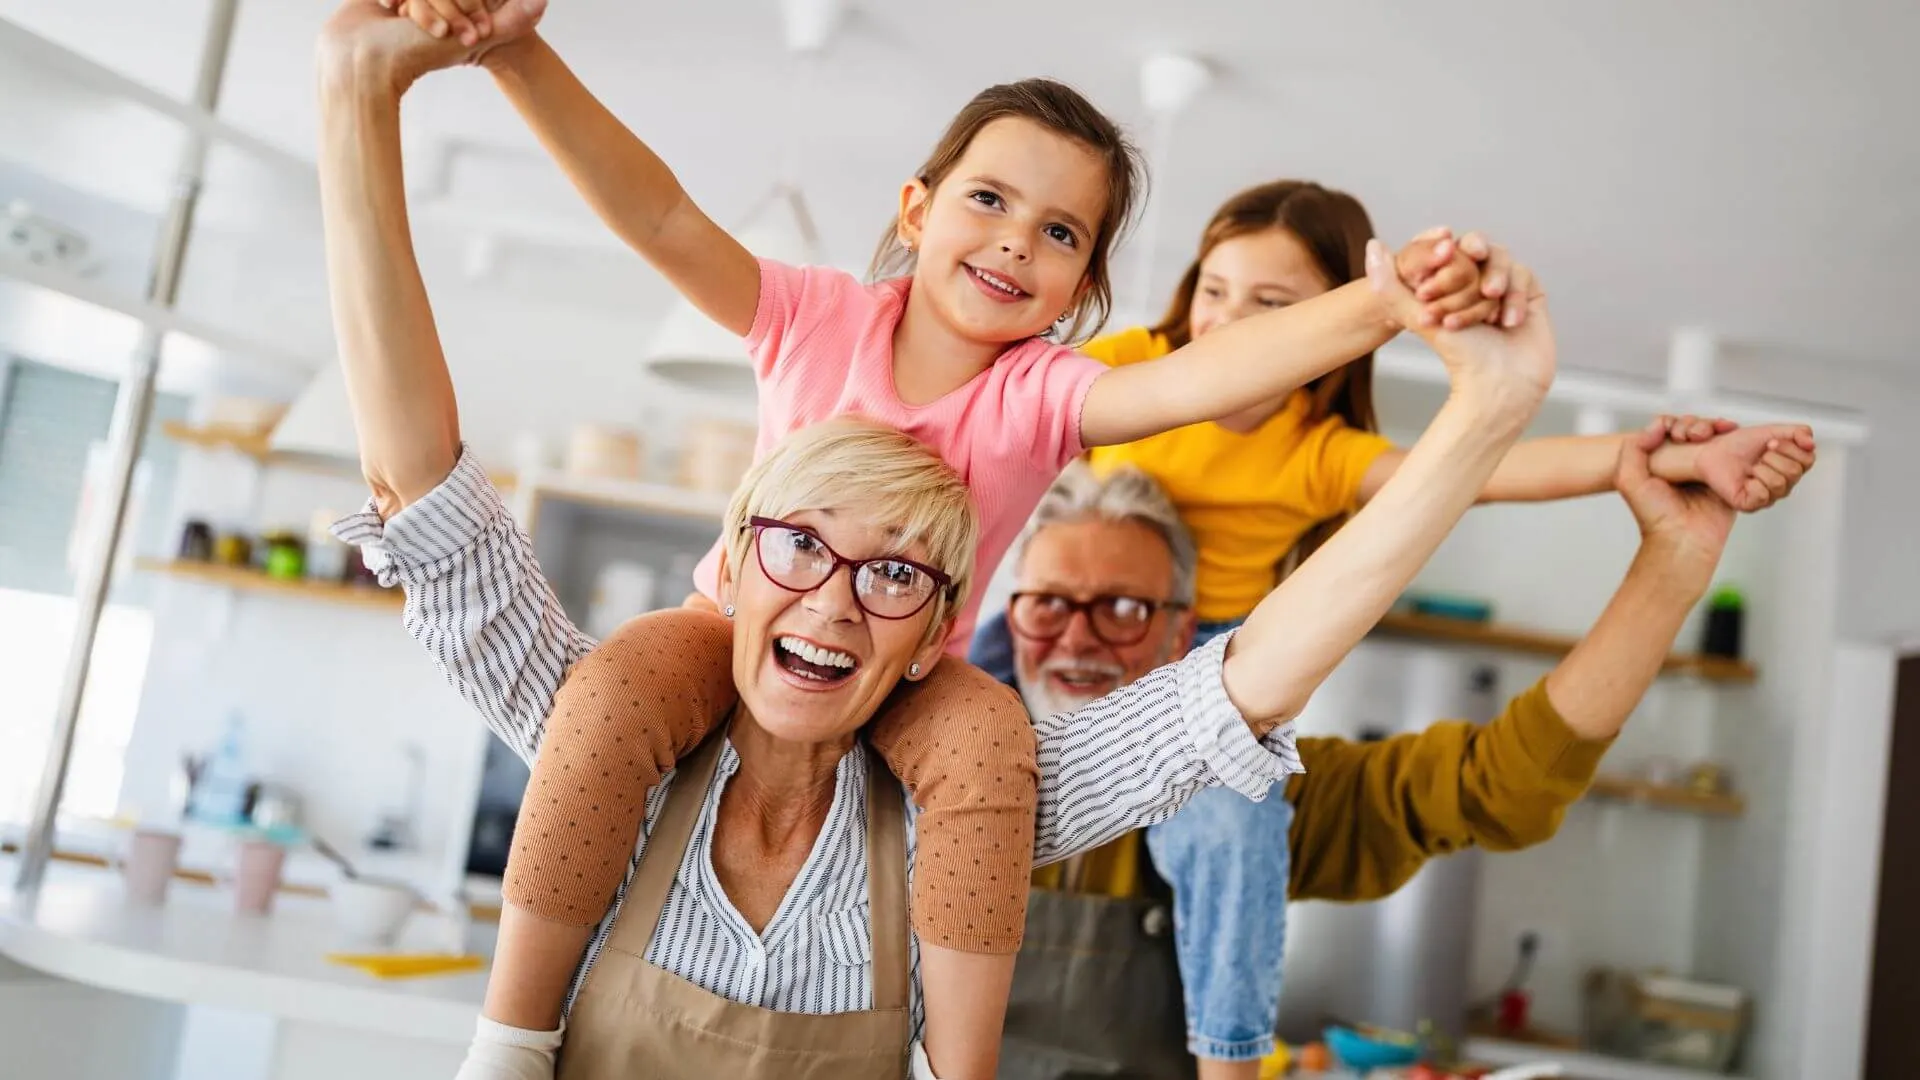 Activities Your Children Can Enjoy with Their Grandparents